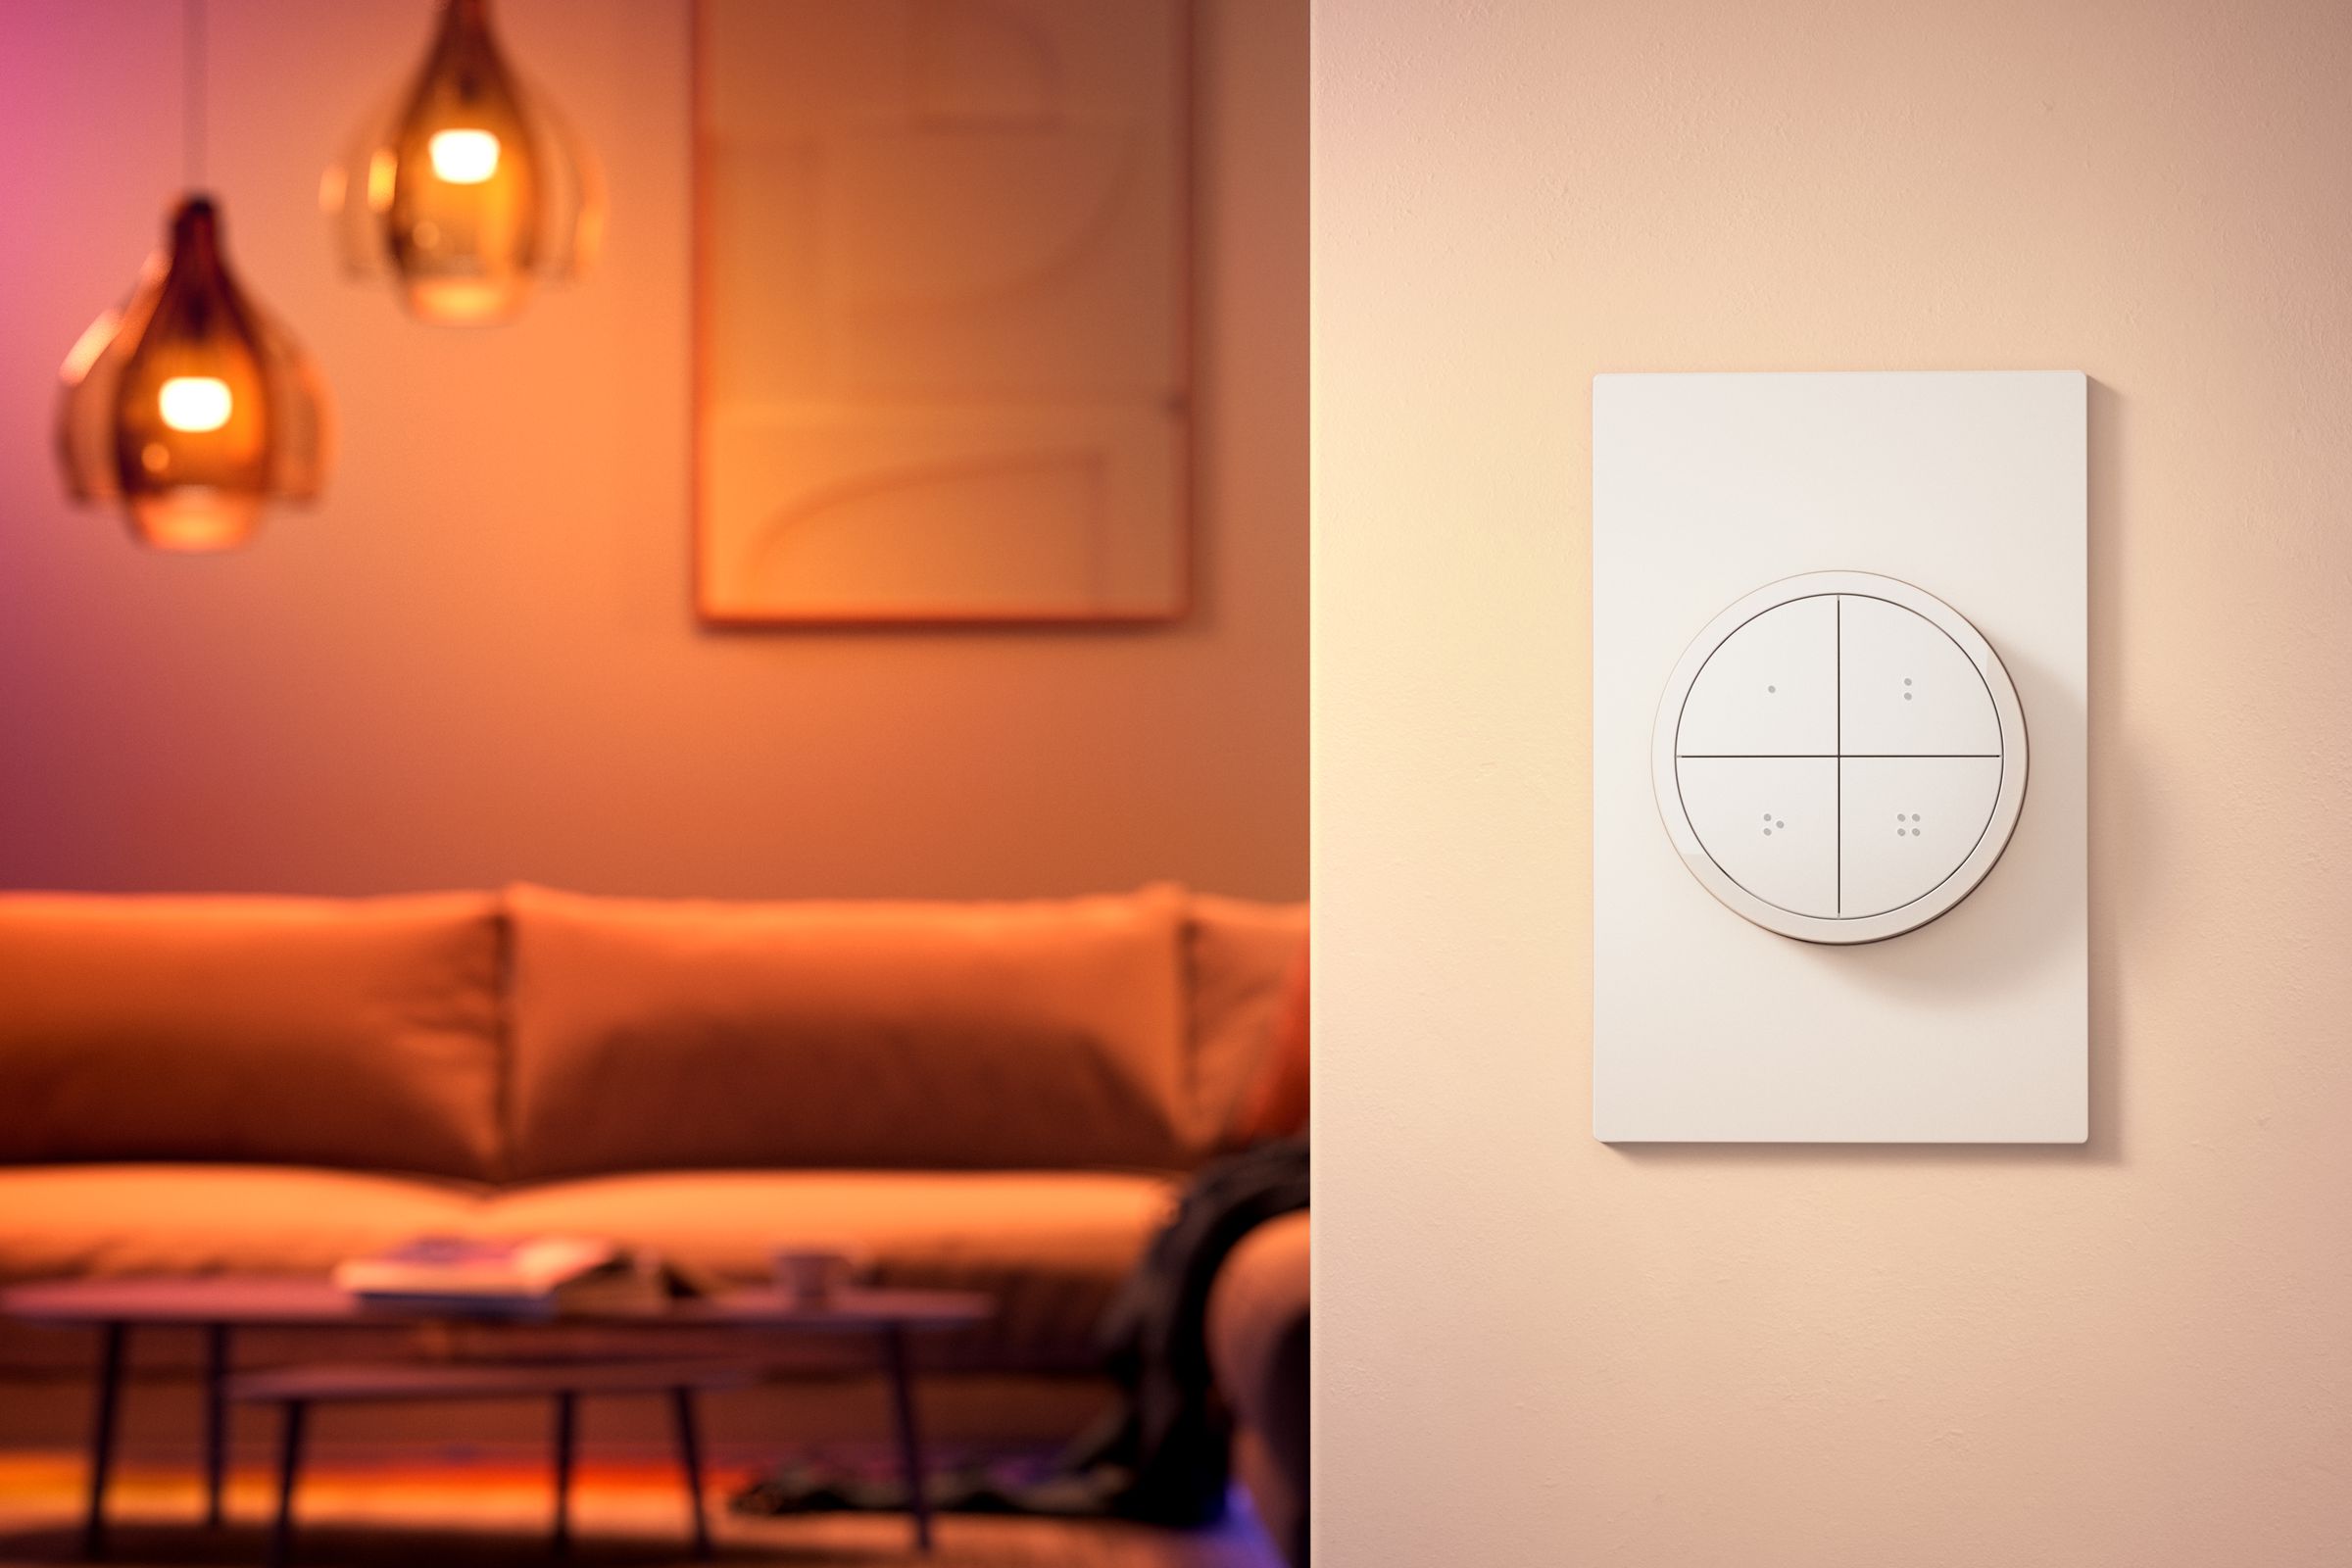 The faster you turn the Philips Hue Tap dial switch the faster your lights brighten or dim.